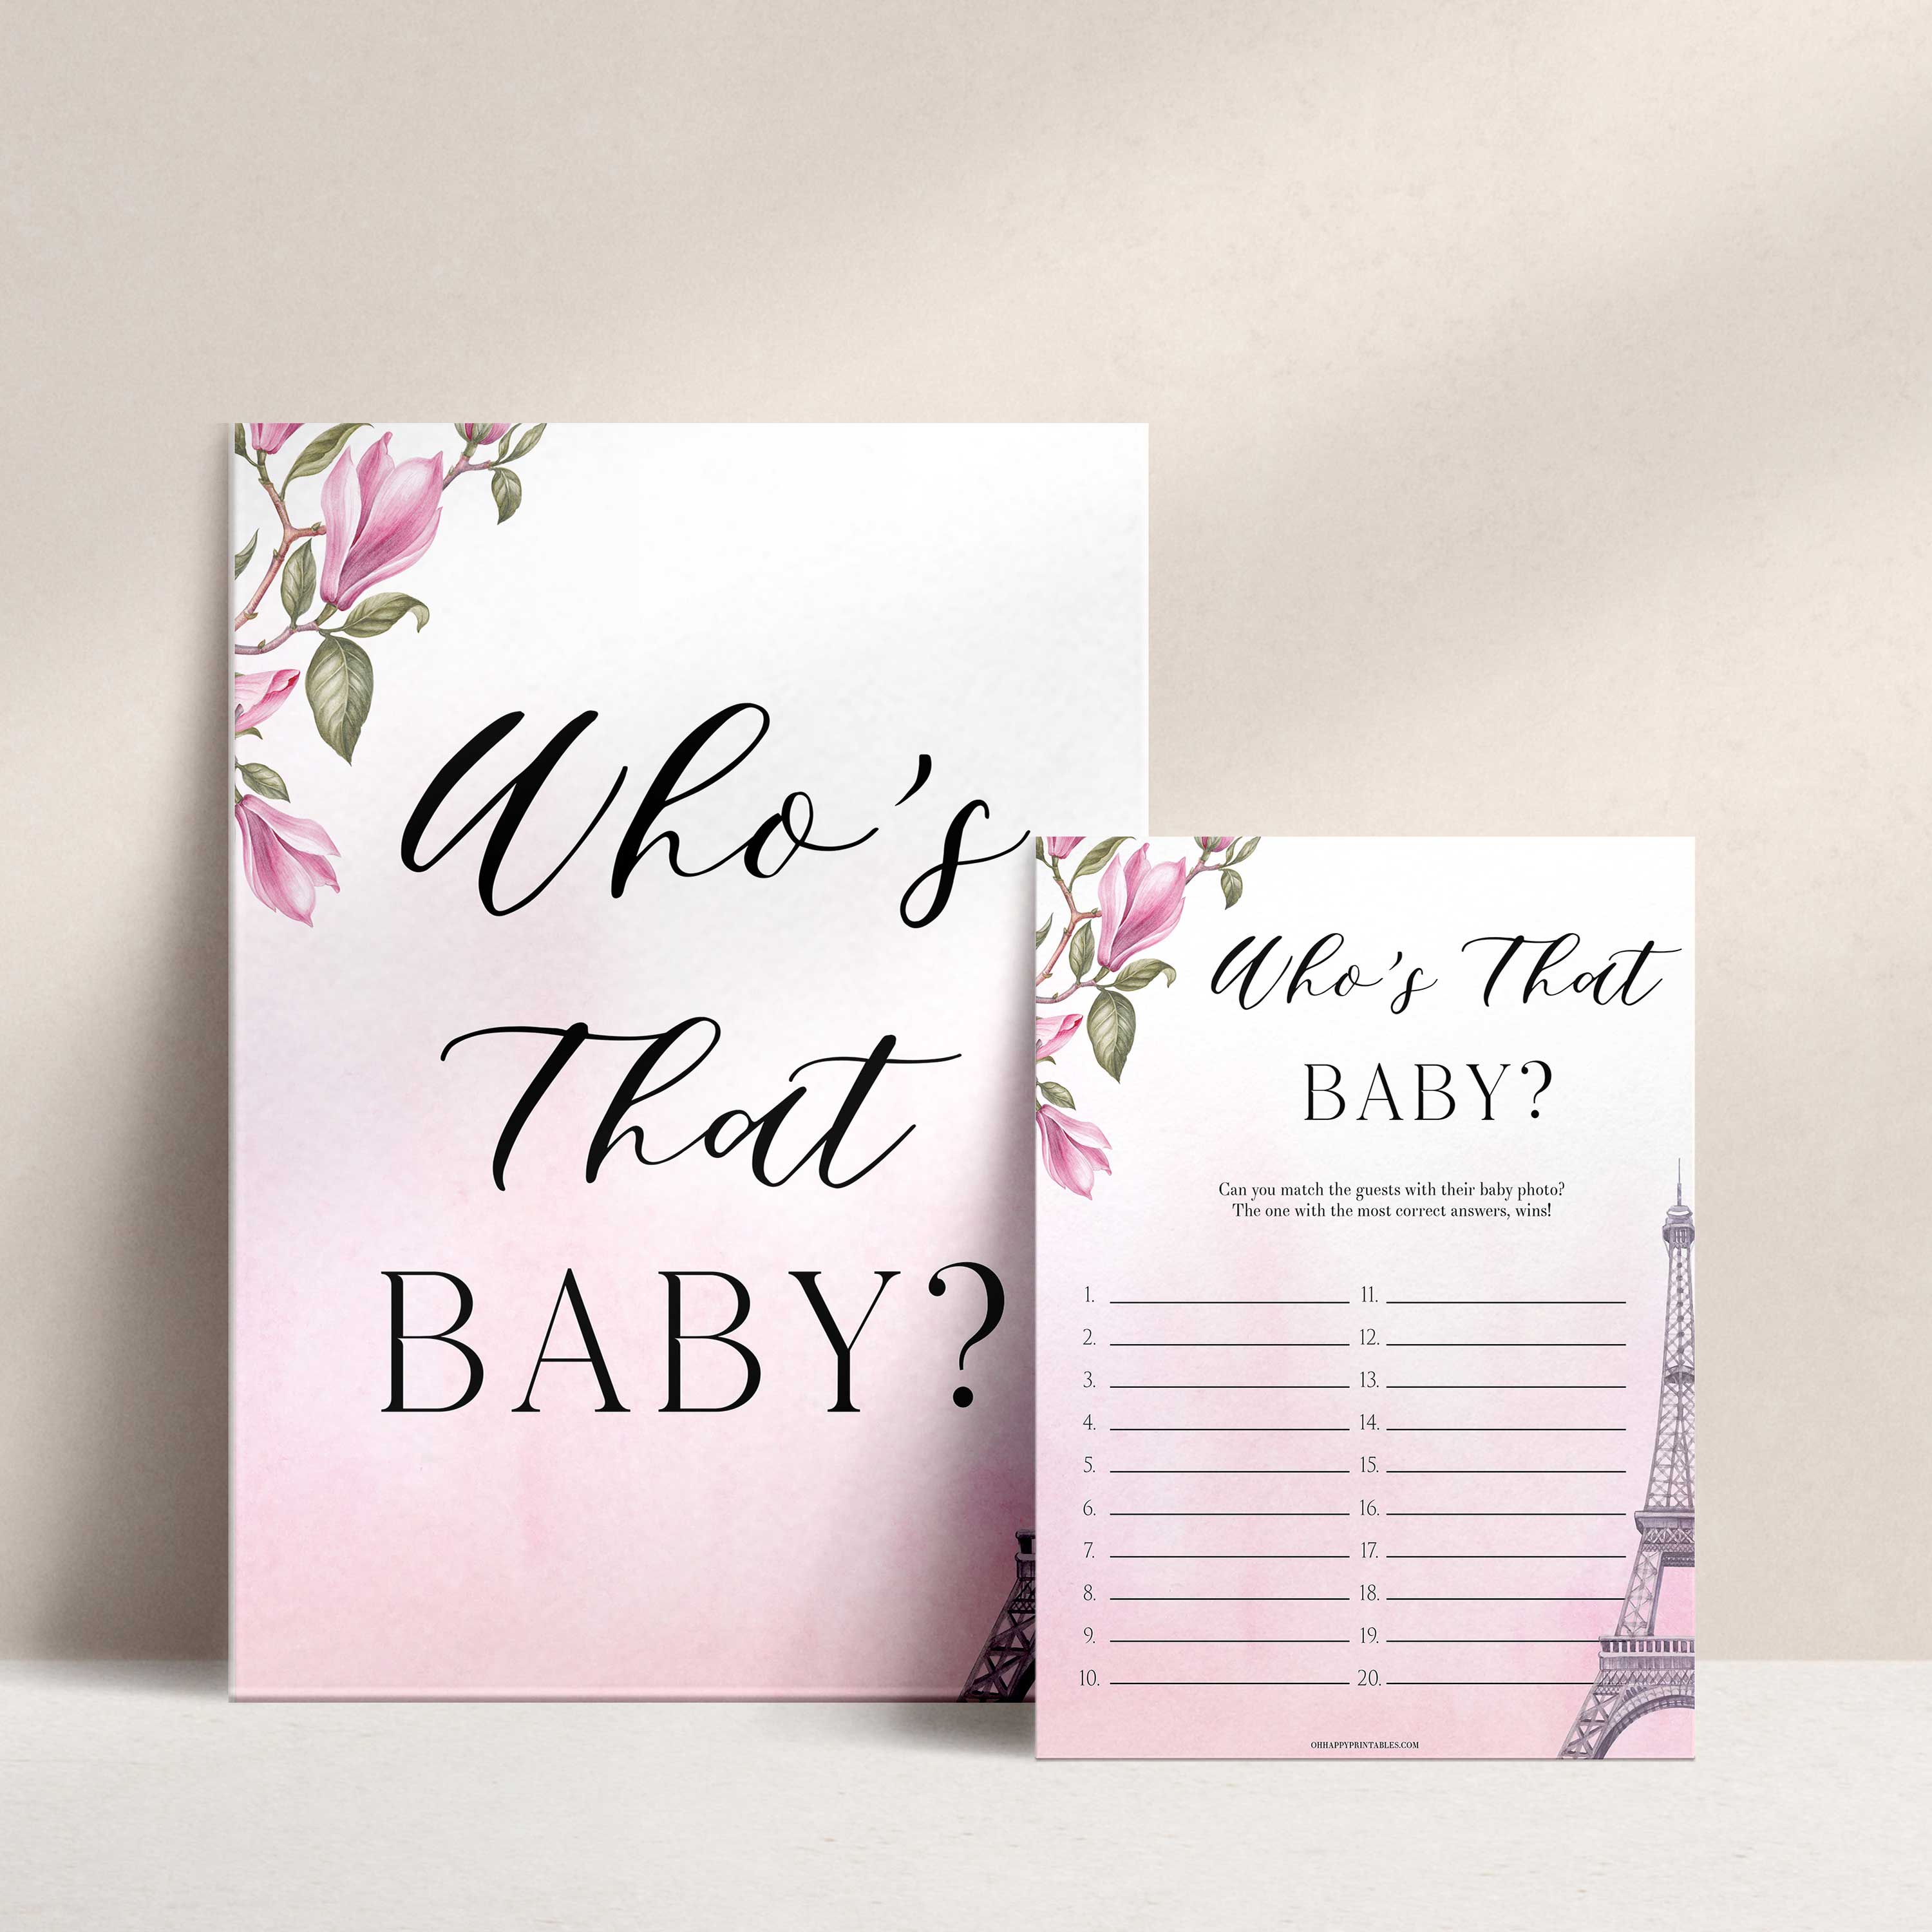 whos that baby game, Paris baby shower games, printable baby shower games, Parisian baby shower games, fun baby shower games